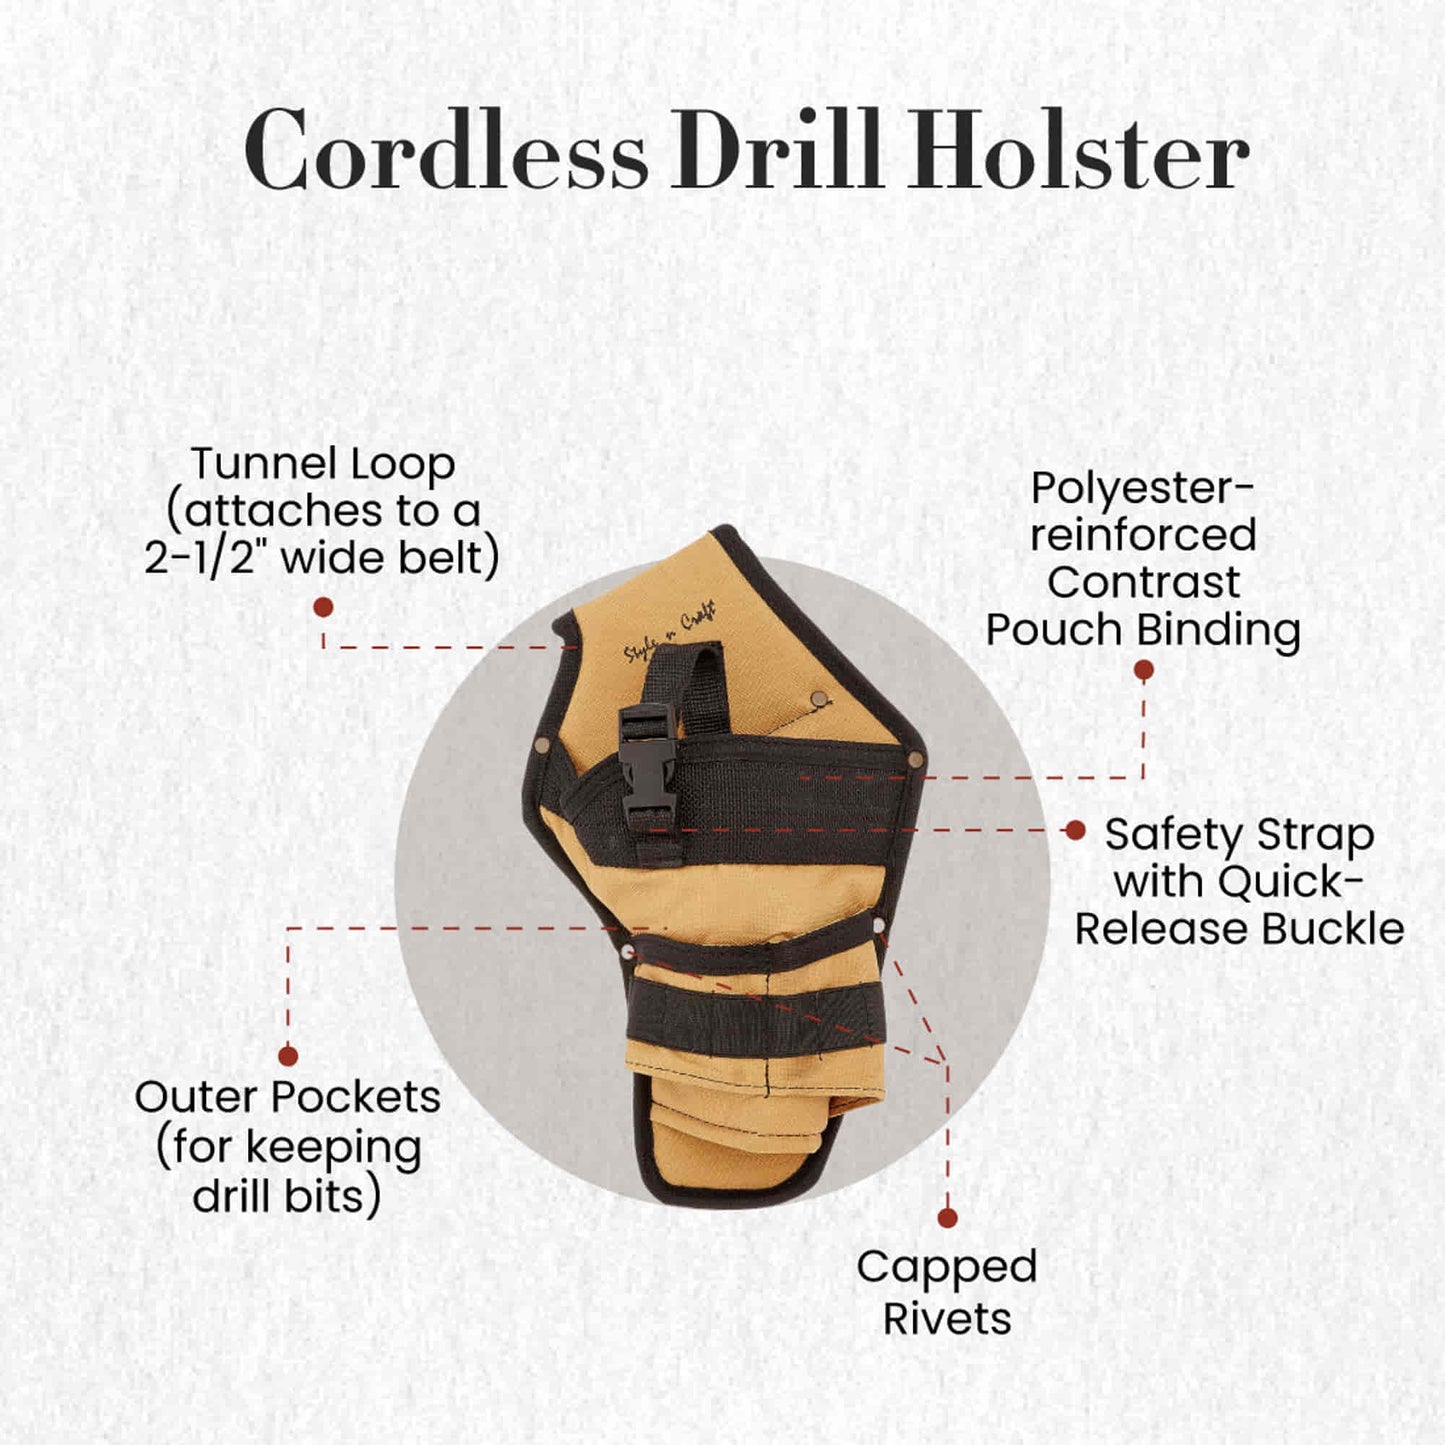 Style n Craft 76101 - Cordless Drill Holster in 600D Khaki Polyester with Black Binding - Front View Showing the Details